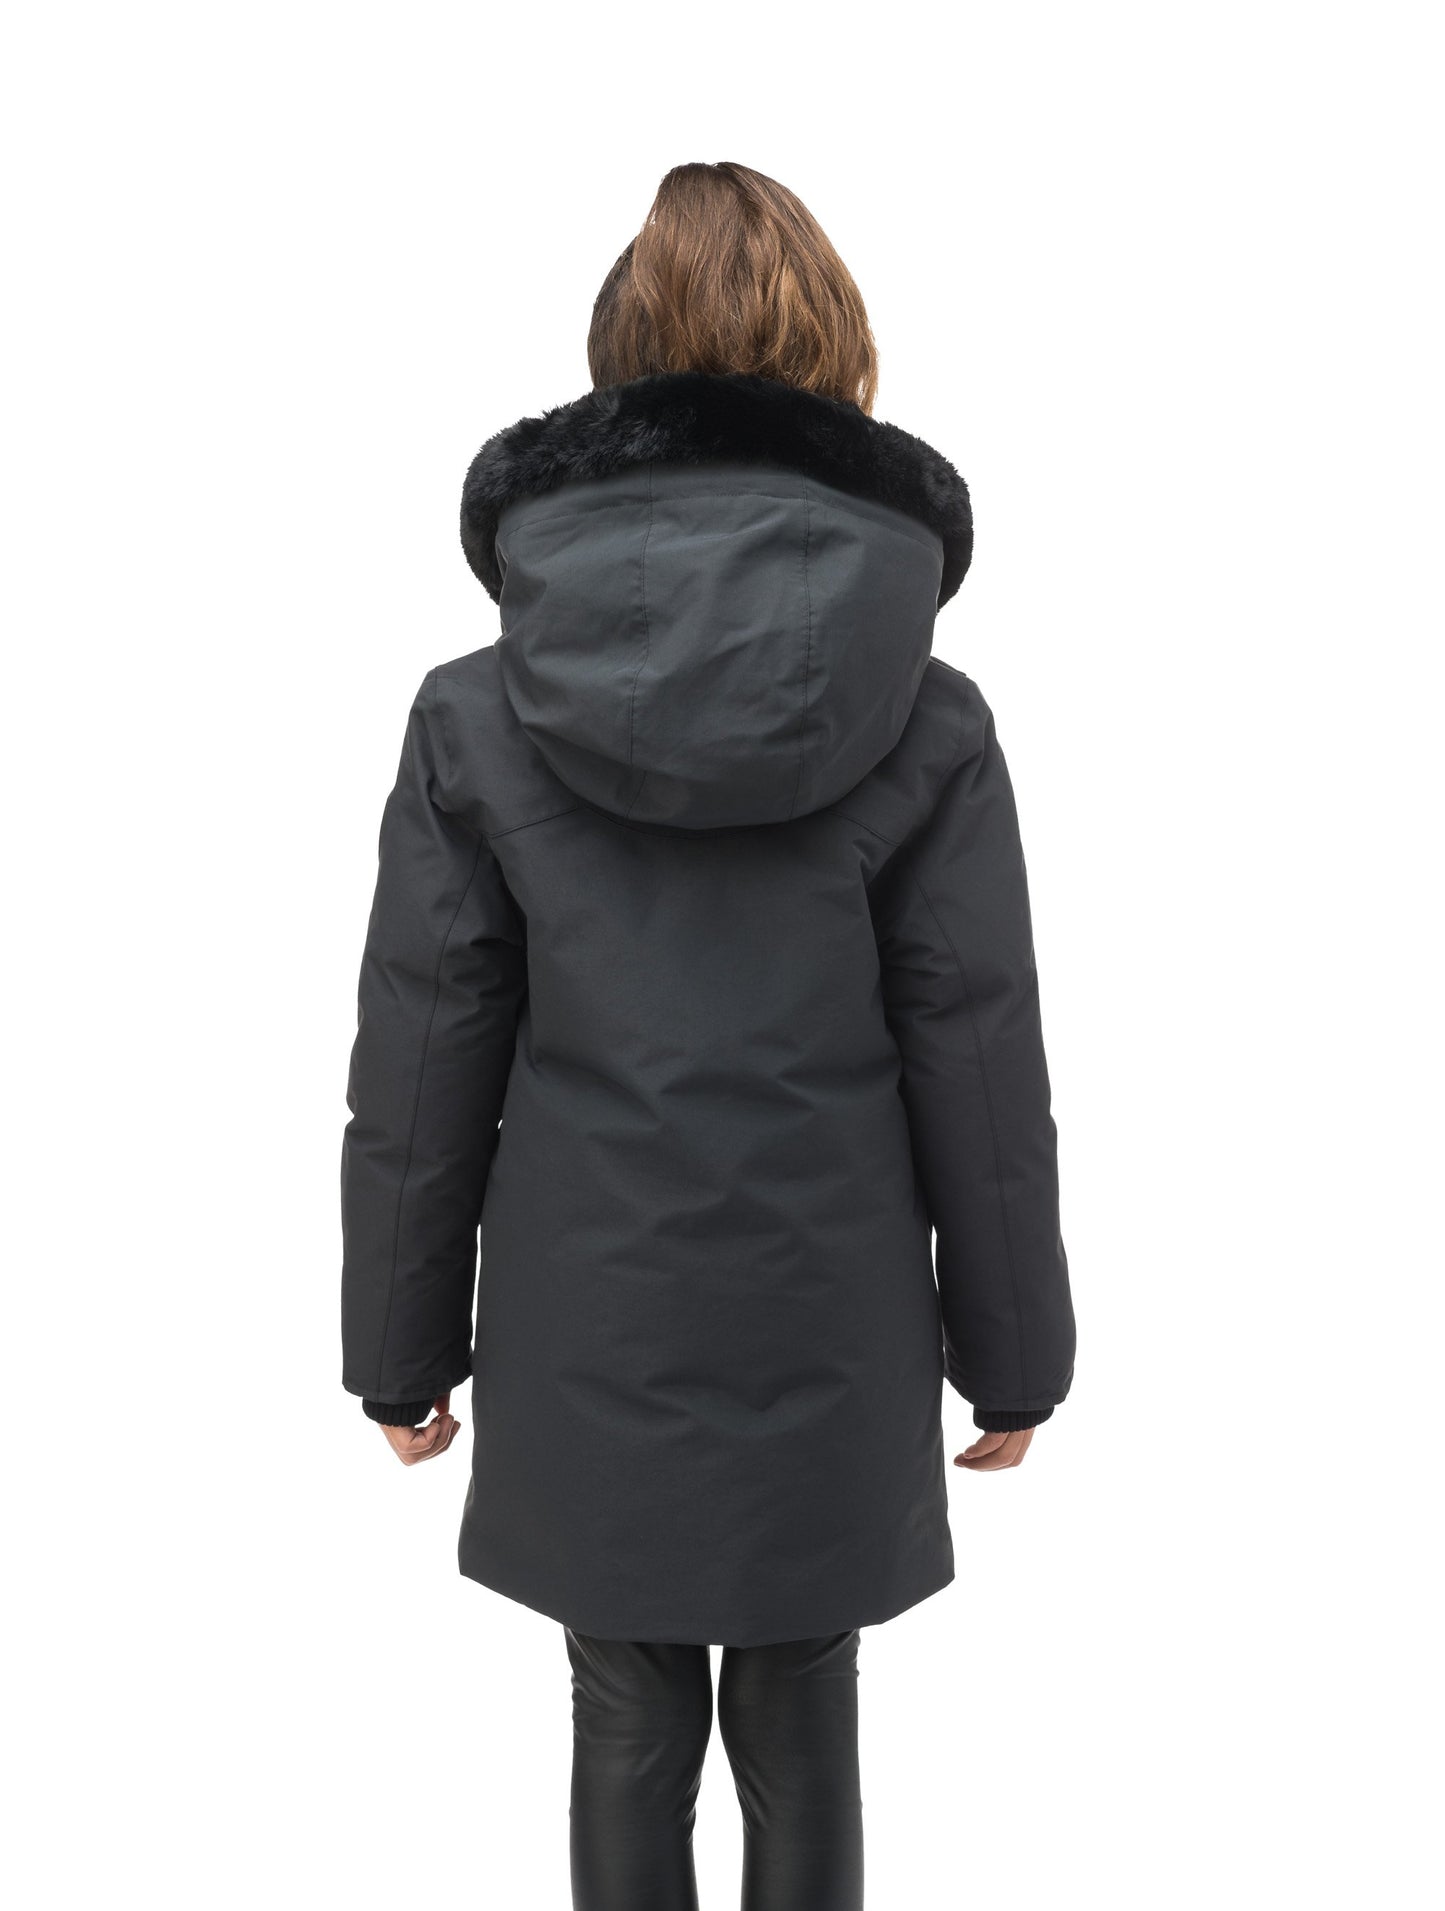 Kid's knee length down filled parka with deer applique detailing on the front patch pockets in Cy Black